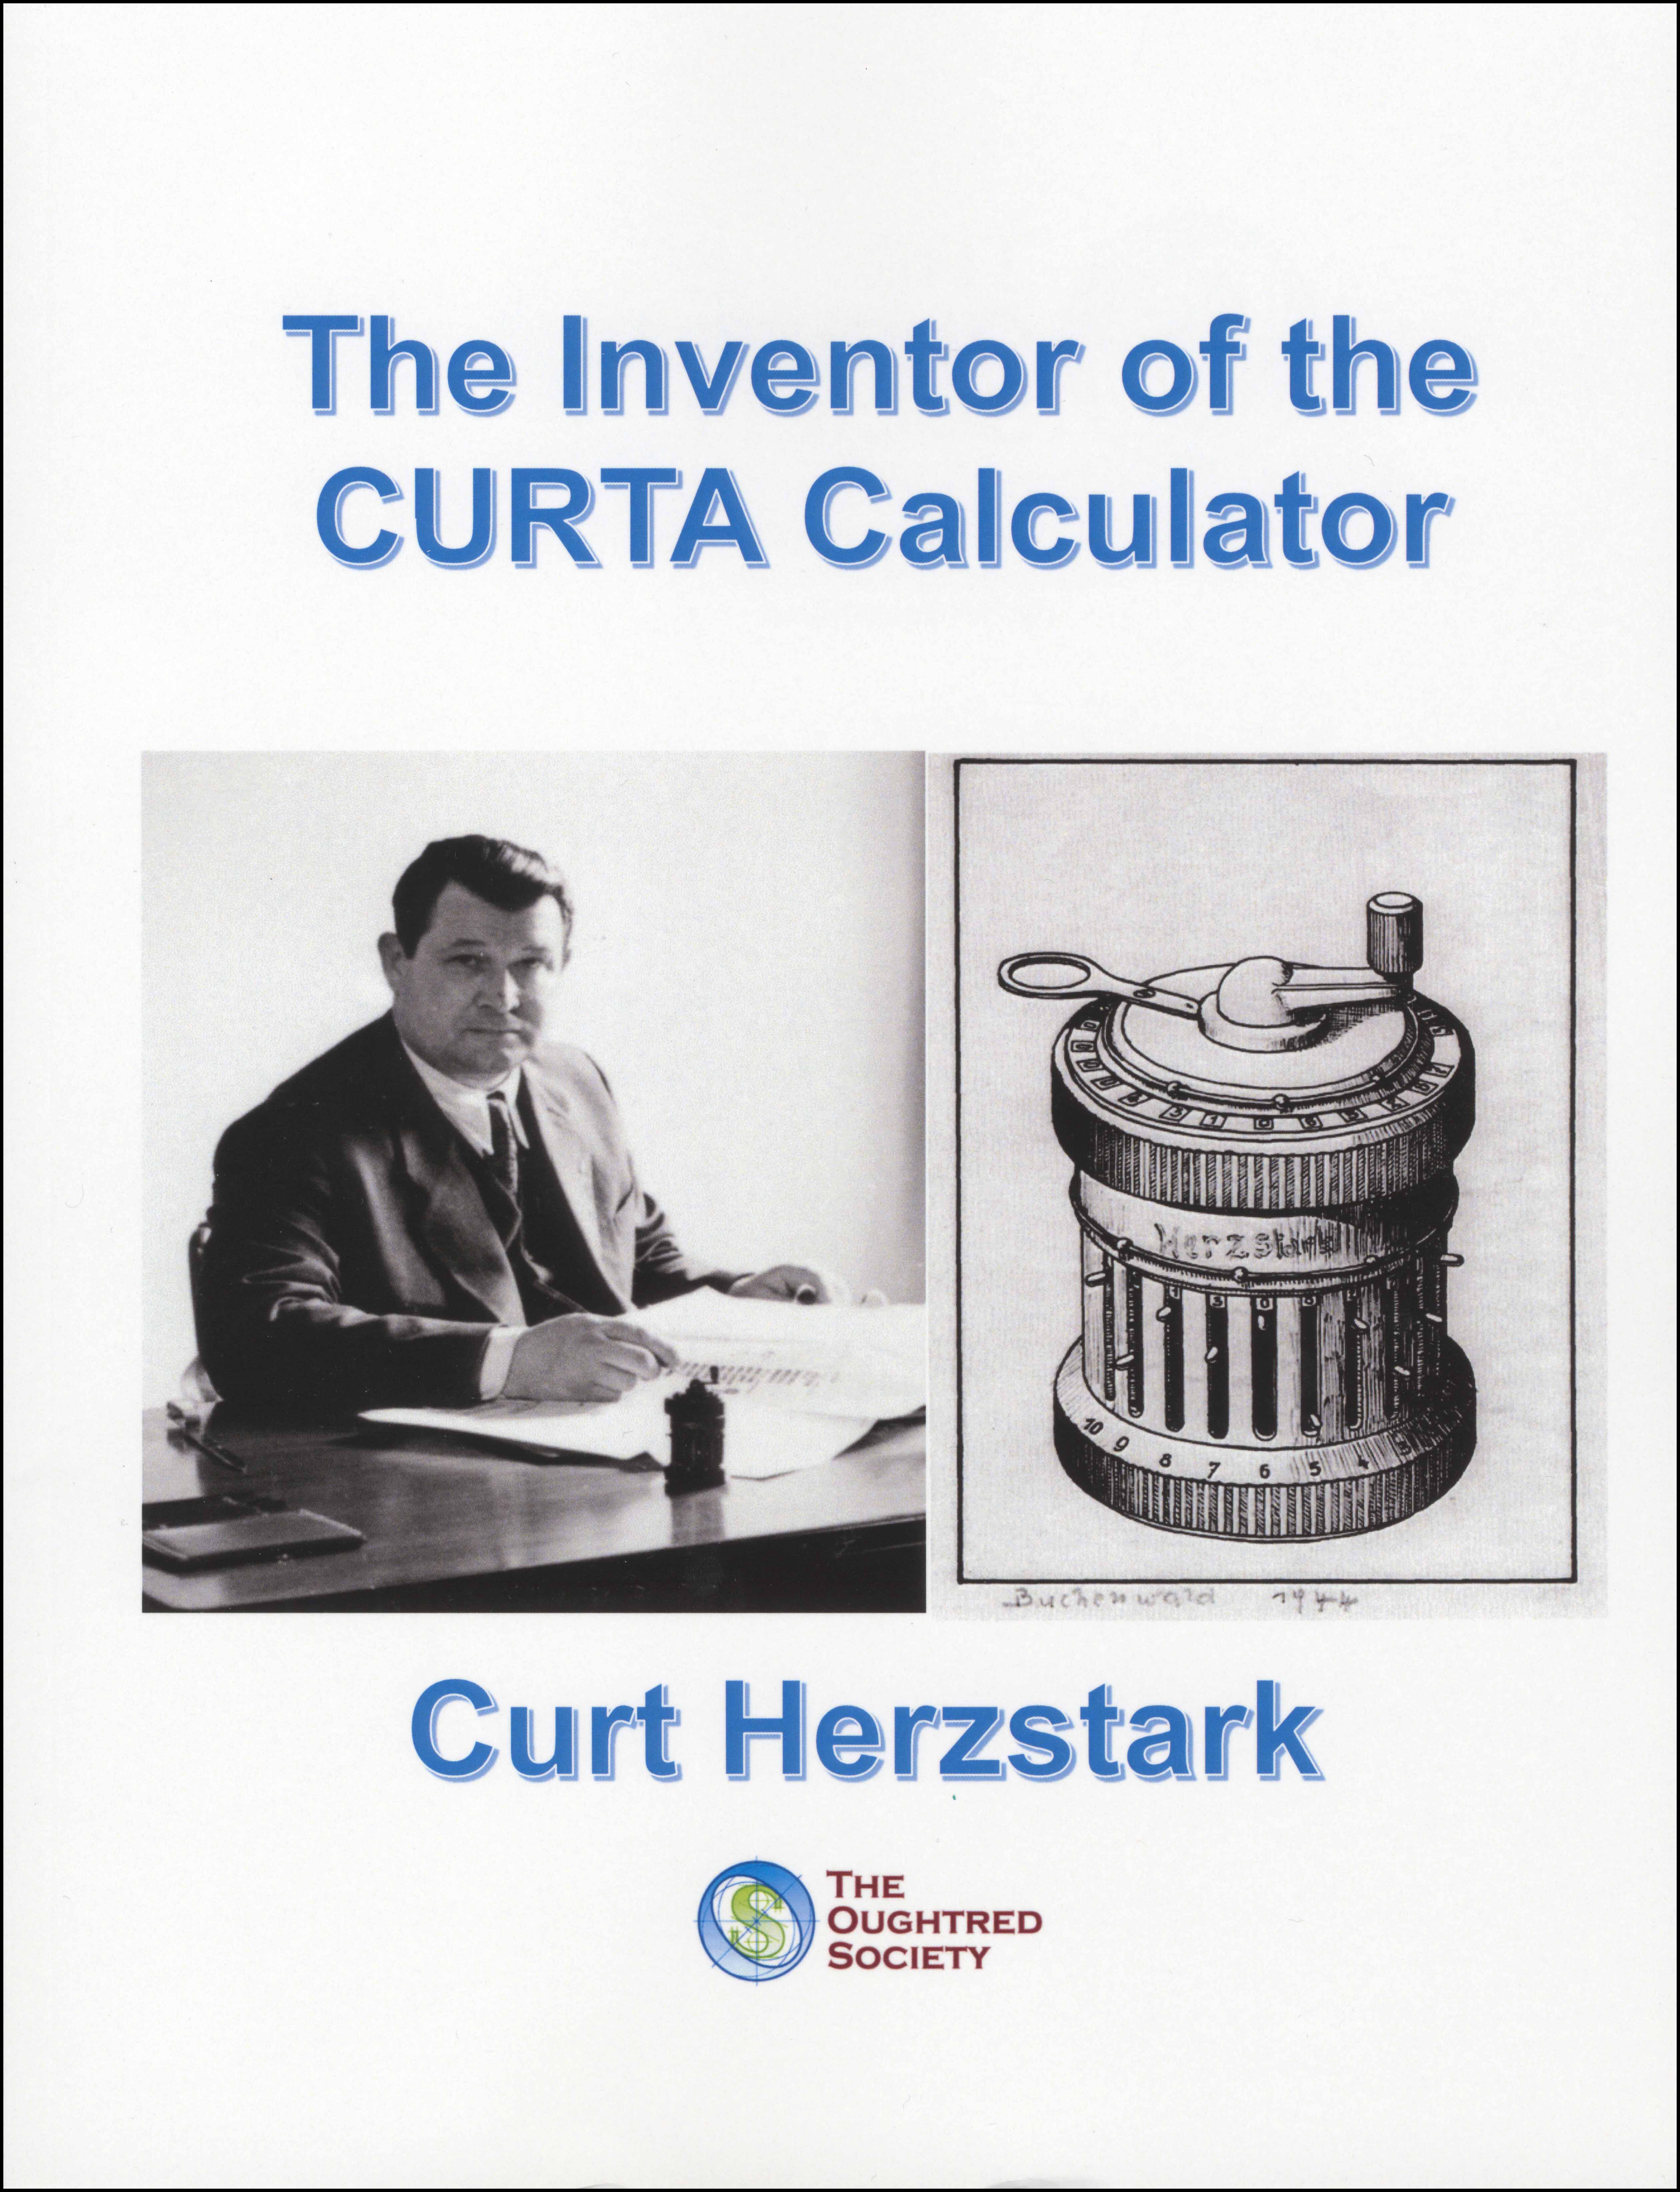 The Inventor of the CURTA Calculator